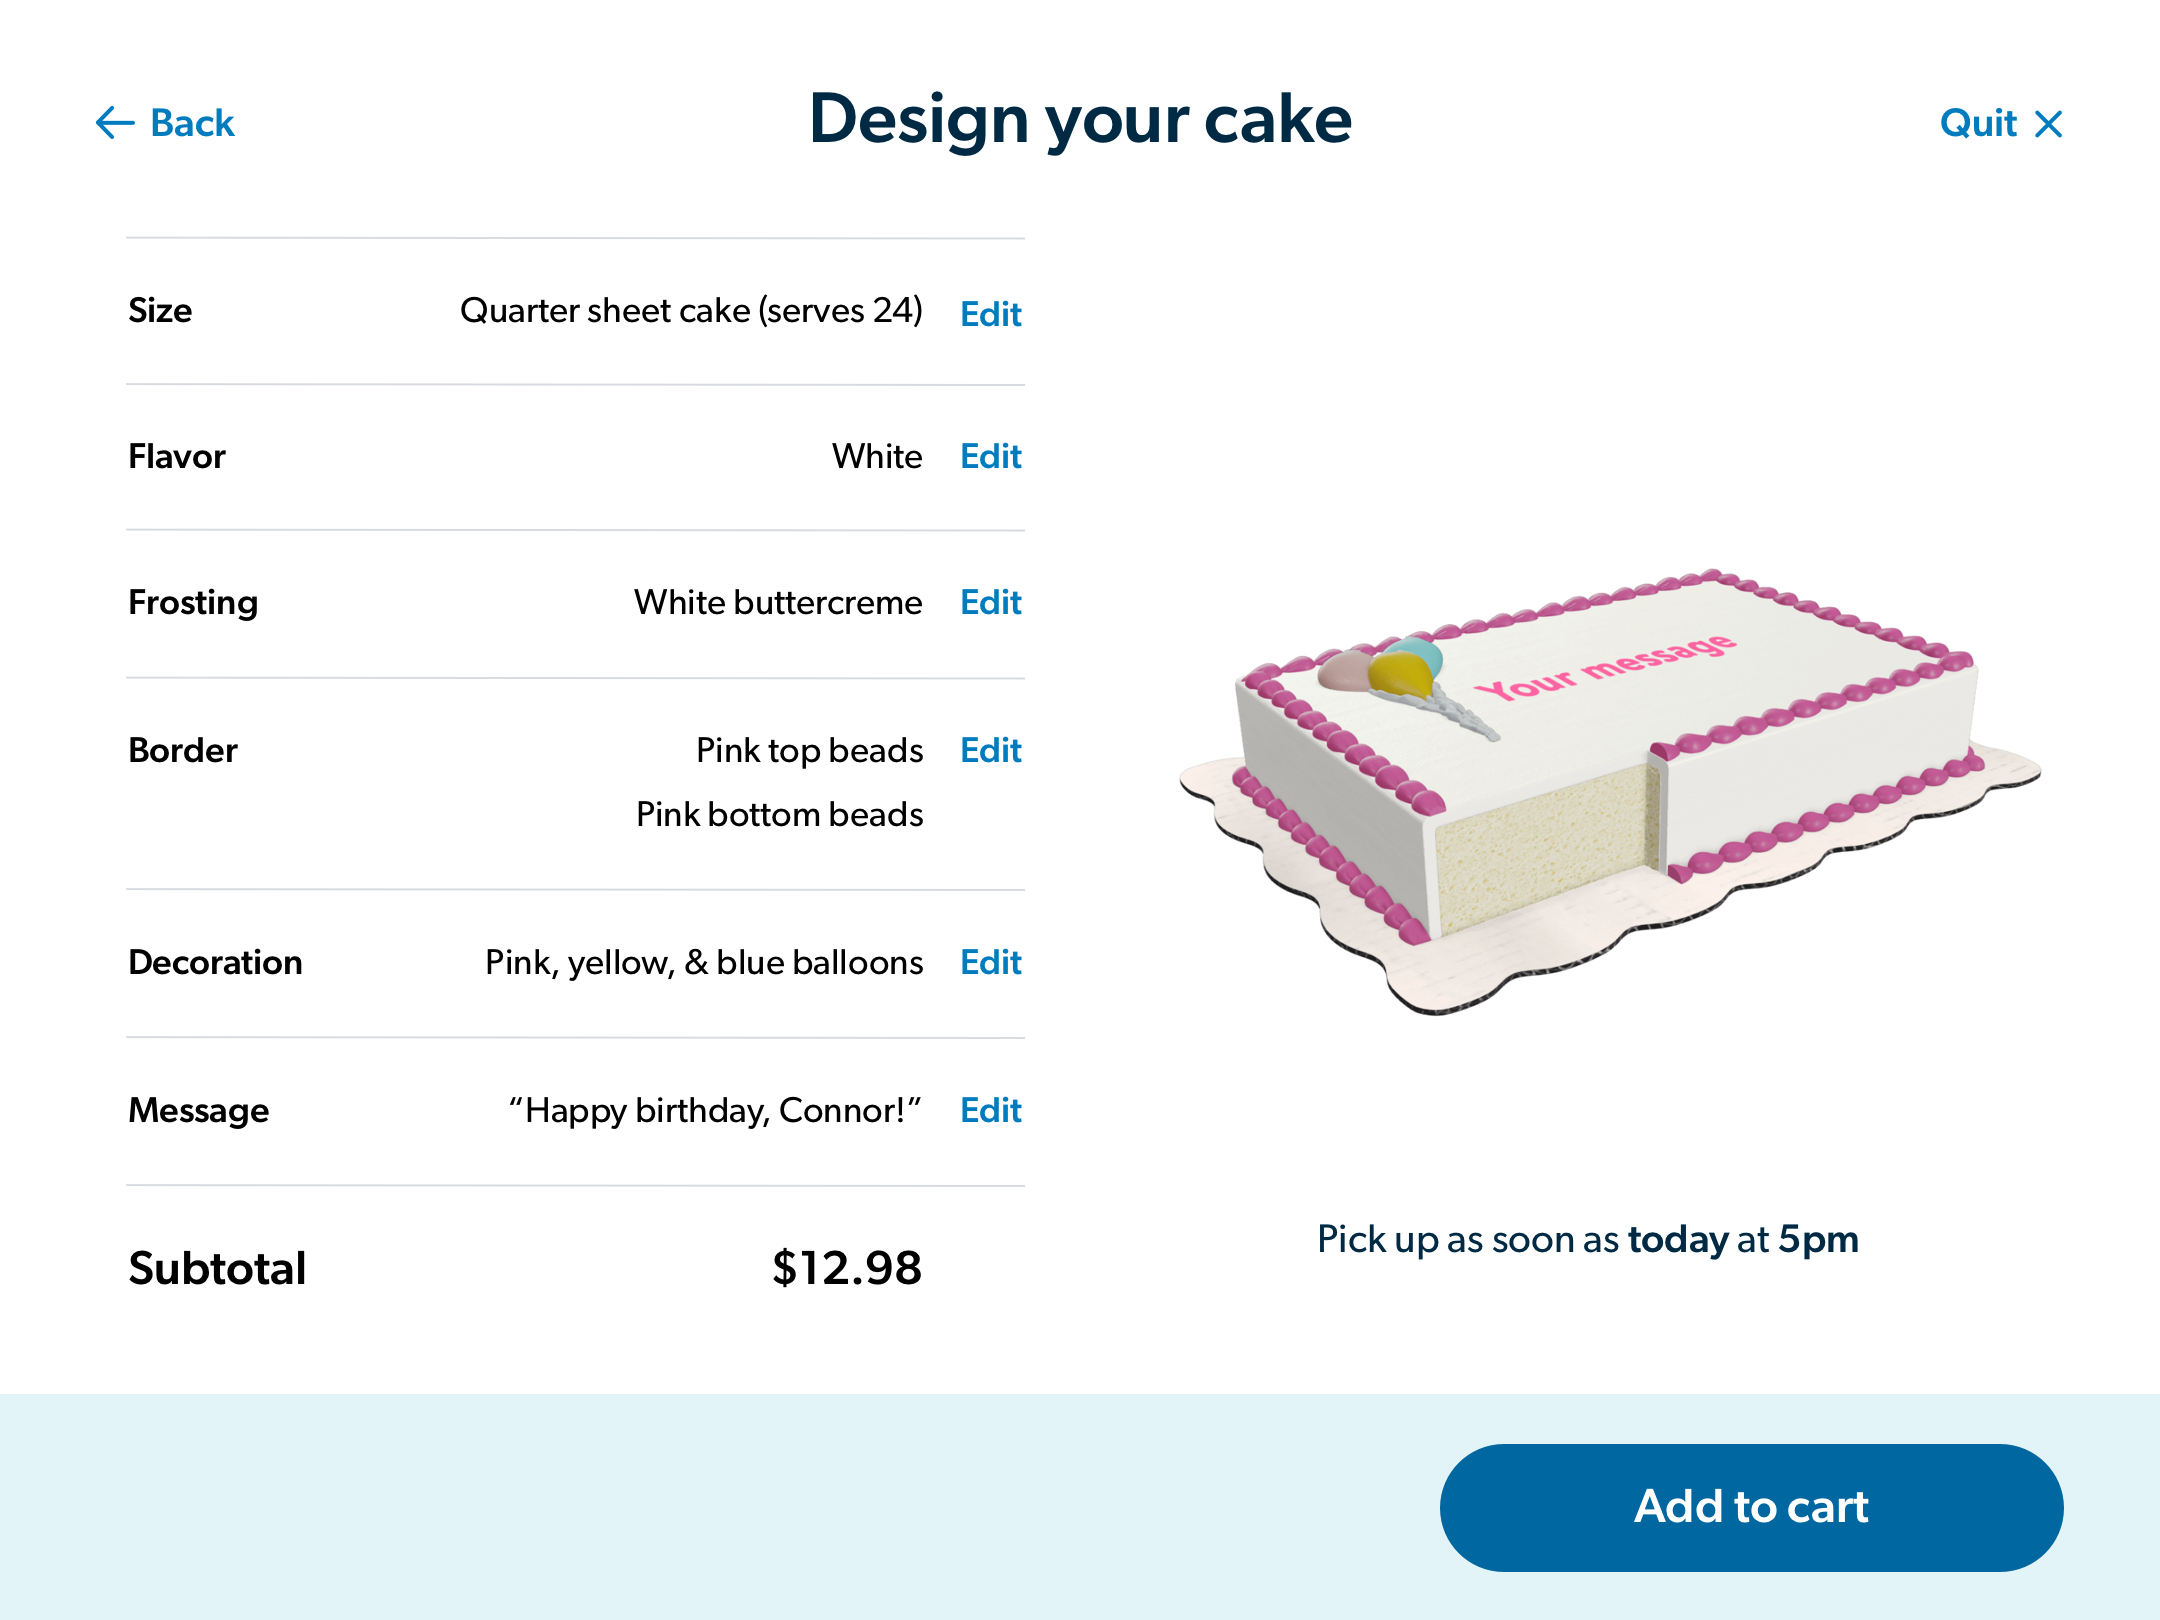 Review your cake order and add it to your cart when you're ready